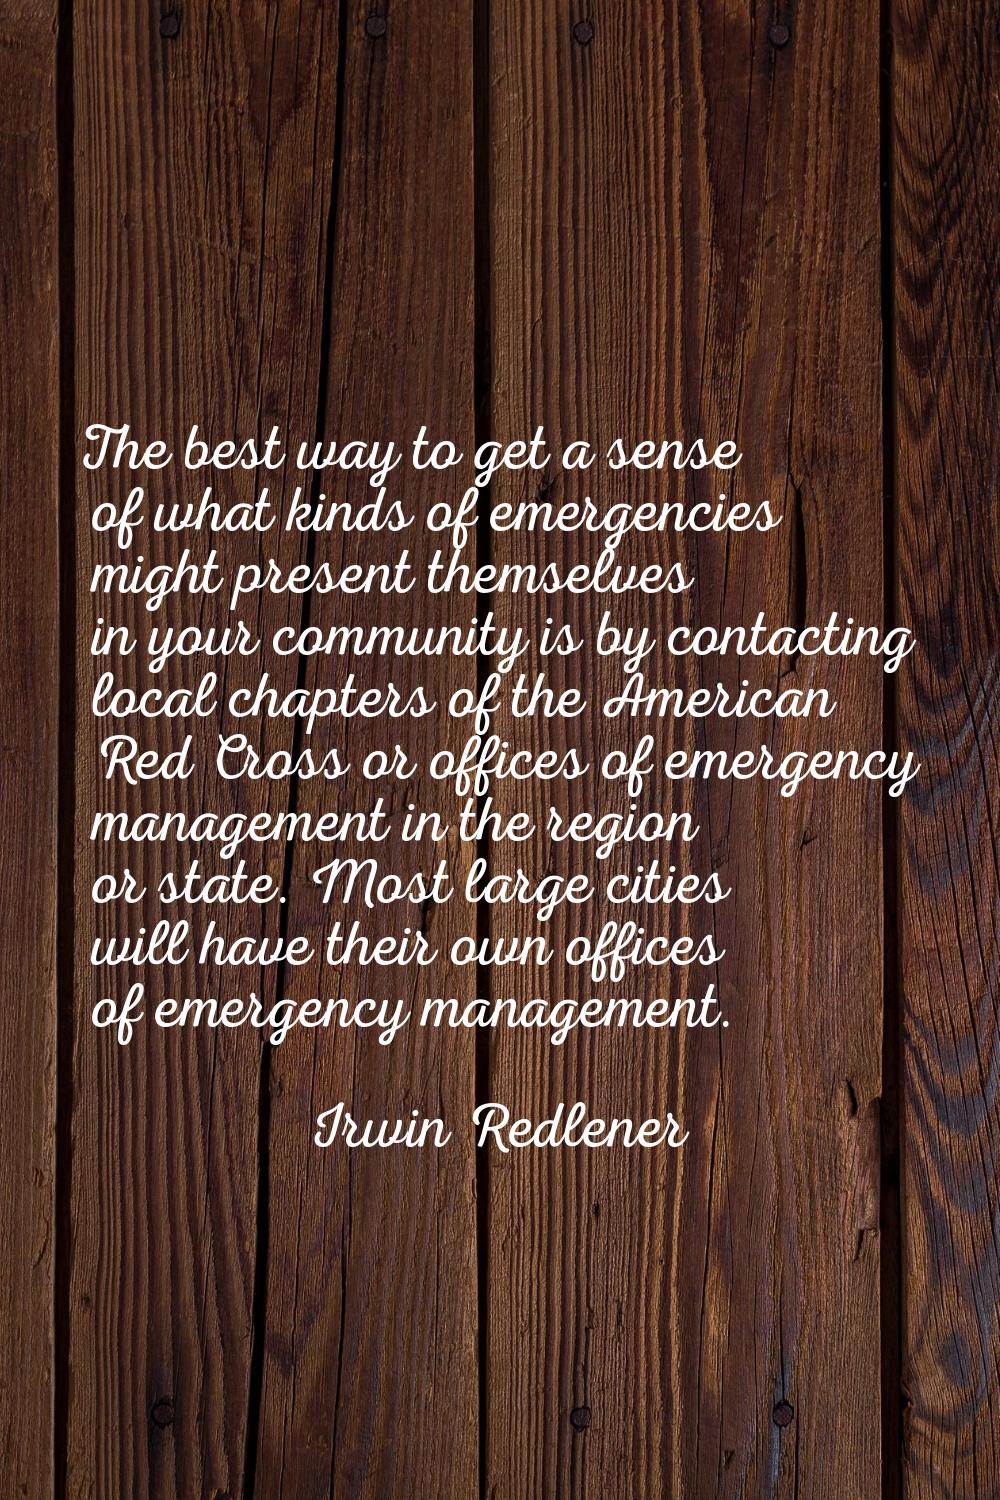 The best way to get a sense of what kinds of emergencies might present themselves in your community